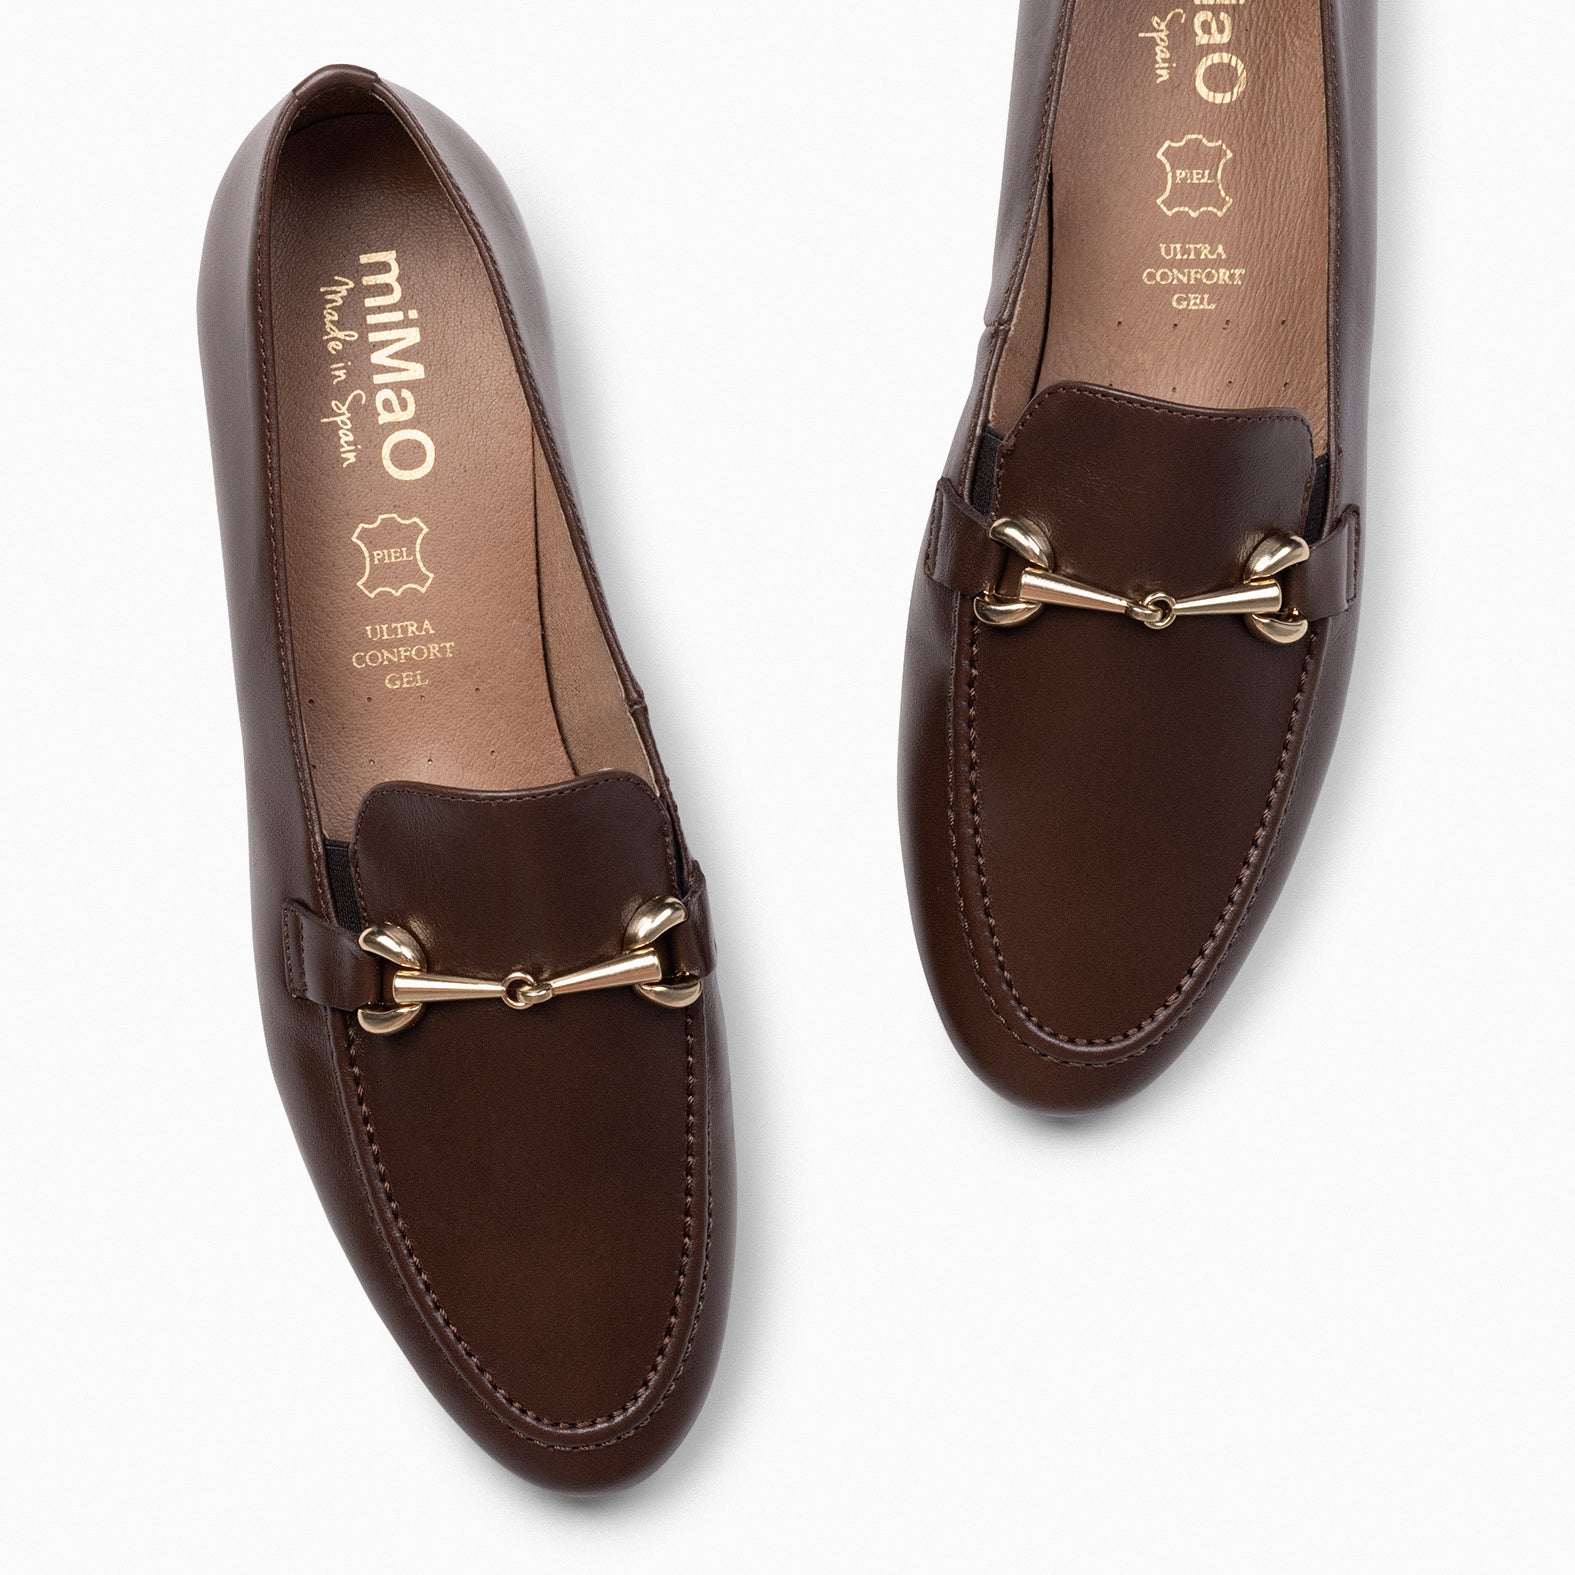 STYLE - BROWN moccasins with metallic detail 